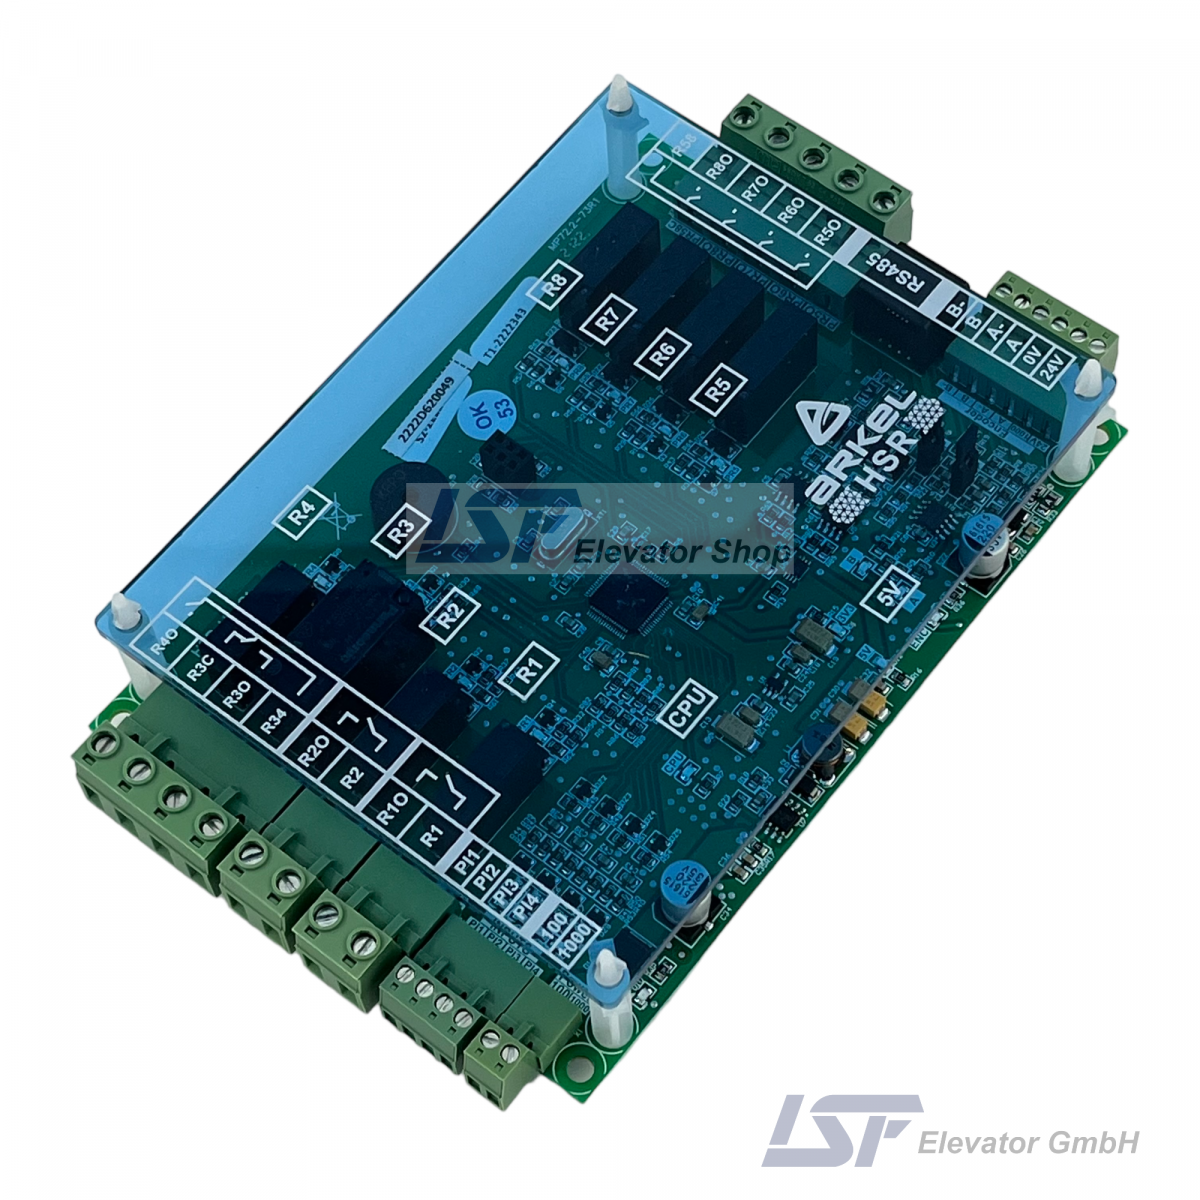 HSR Arkel Connection Board For Hydraulics and VVVF (ARL-700) (1)